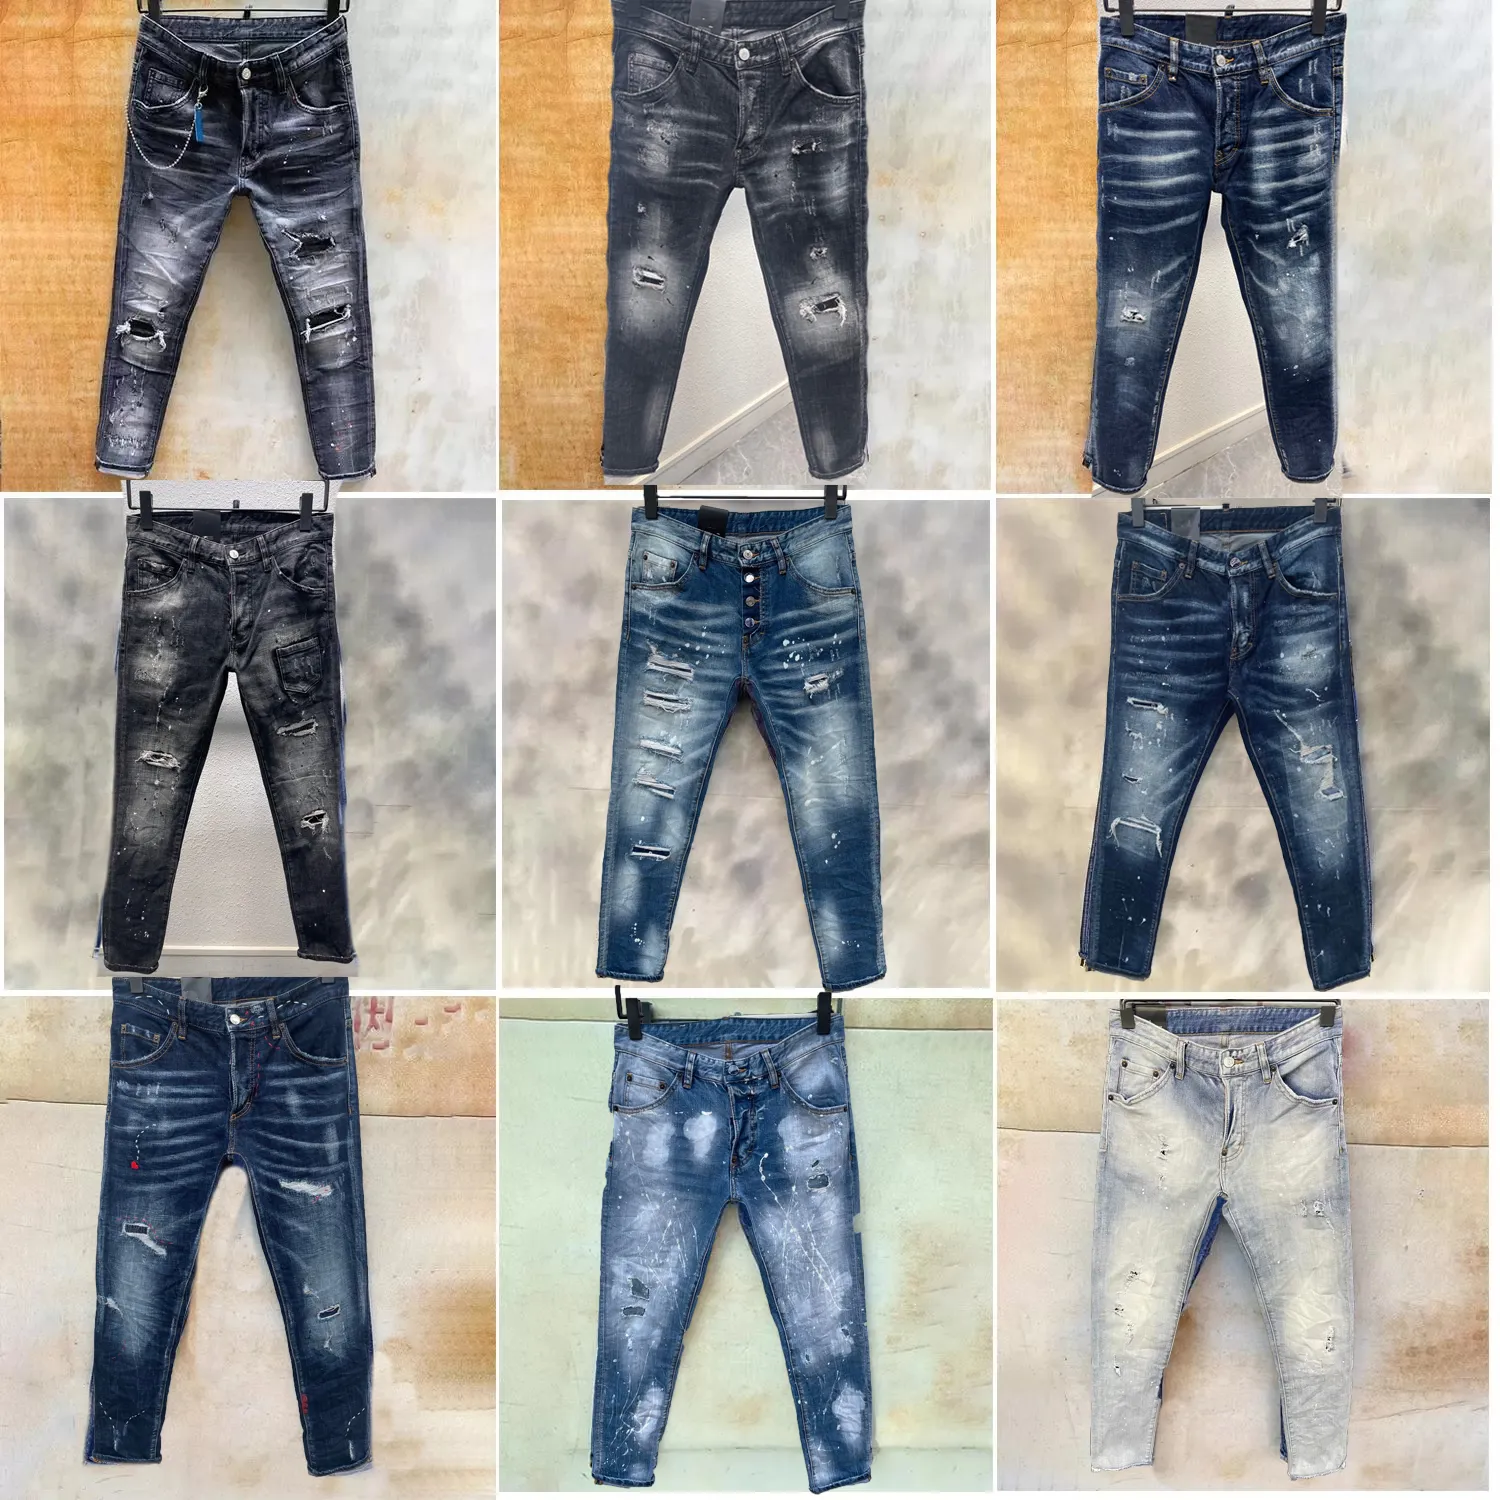 Mens jeans Rips straight denim Jeans italy Fashion Slim Fit Washed Motocycle Denims Pants